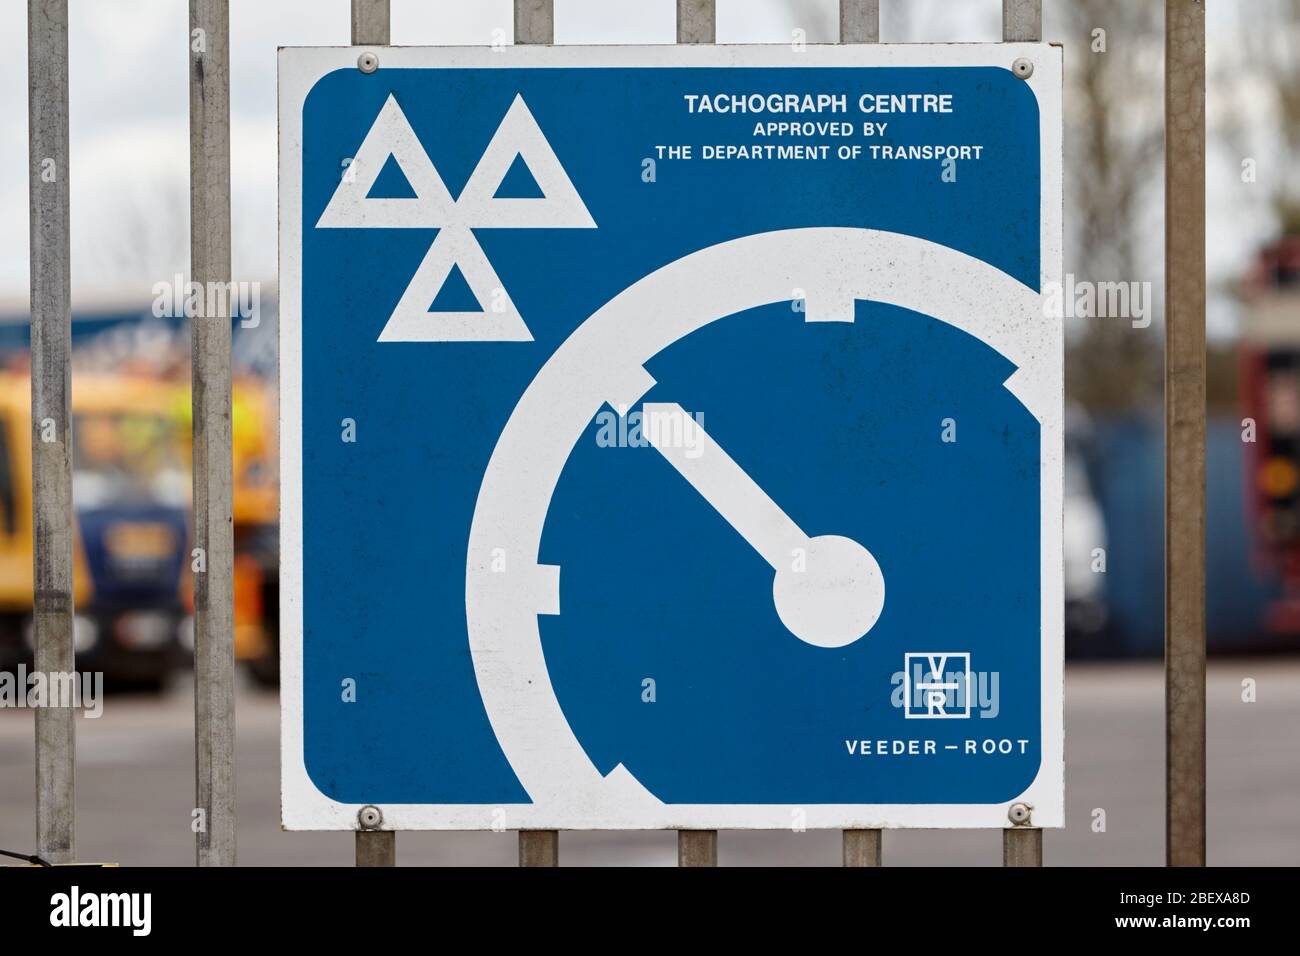 sign for tachograph centre approved by the department of transport Newtownabbey Northern Ireland UK Stock Photo